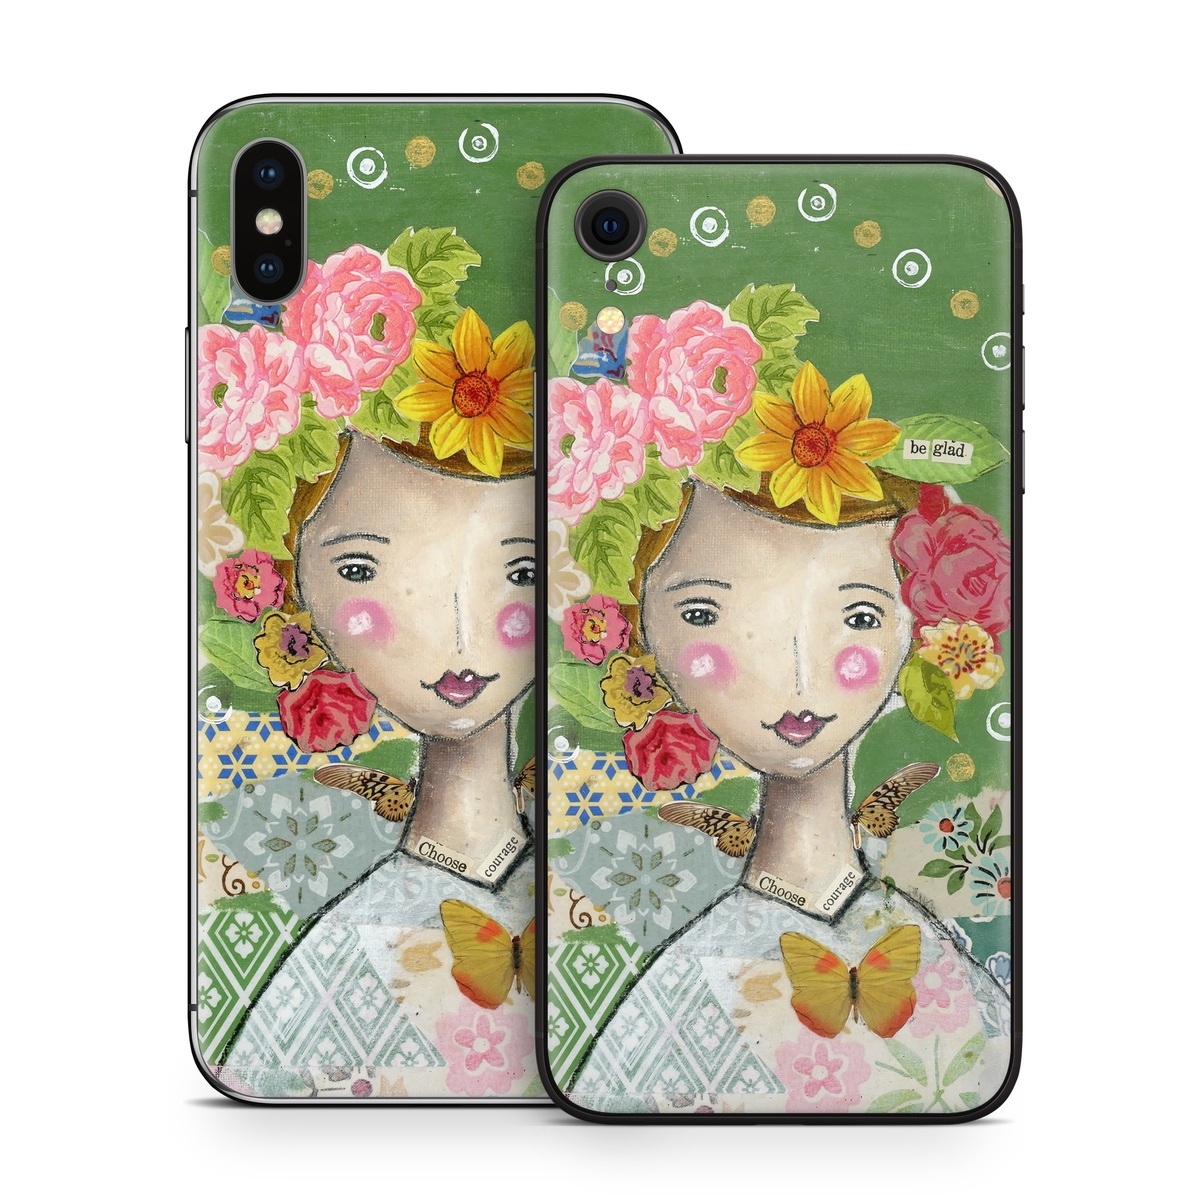 iPhone XS Skin design of Watercolor paint, Illustration, Art, Painting, Plant, Flower, Visual arts, Paint, Child art, Acrylic paint, with green, pink, red, orange, white, blue, brown colors